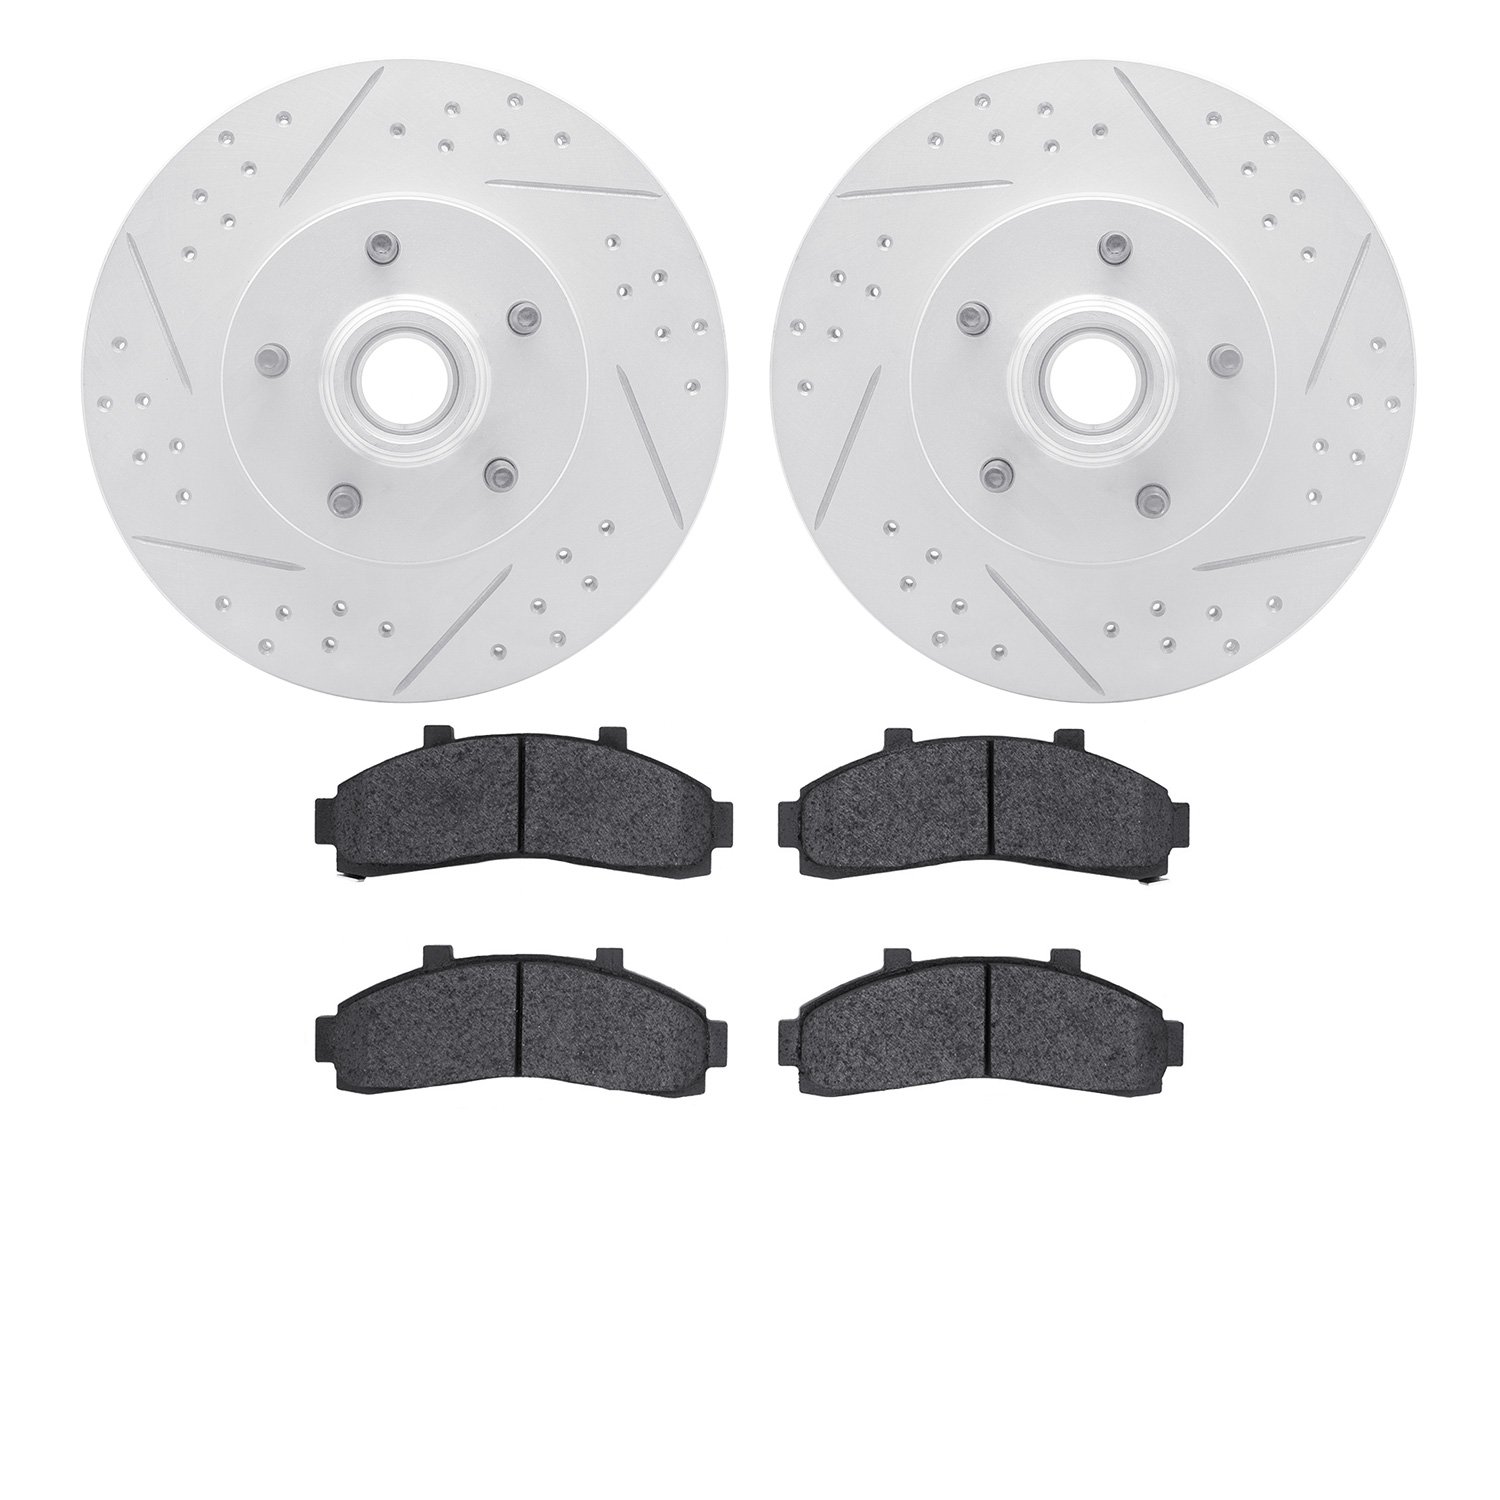 2402-54012 Geoperformance Drilled/Slotted Brake Rotors with Ultimate-Duty Brake Pads Kit, 1995-2002 Ford/Lincoln/Mercury/Mazda,